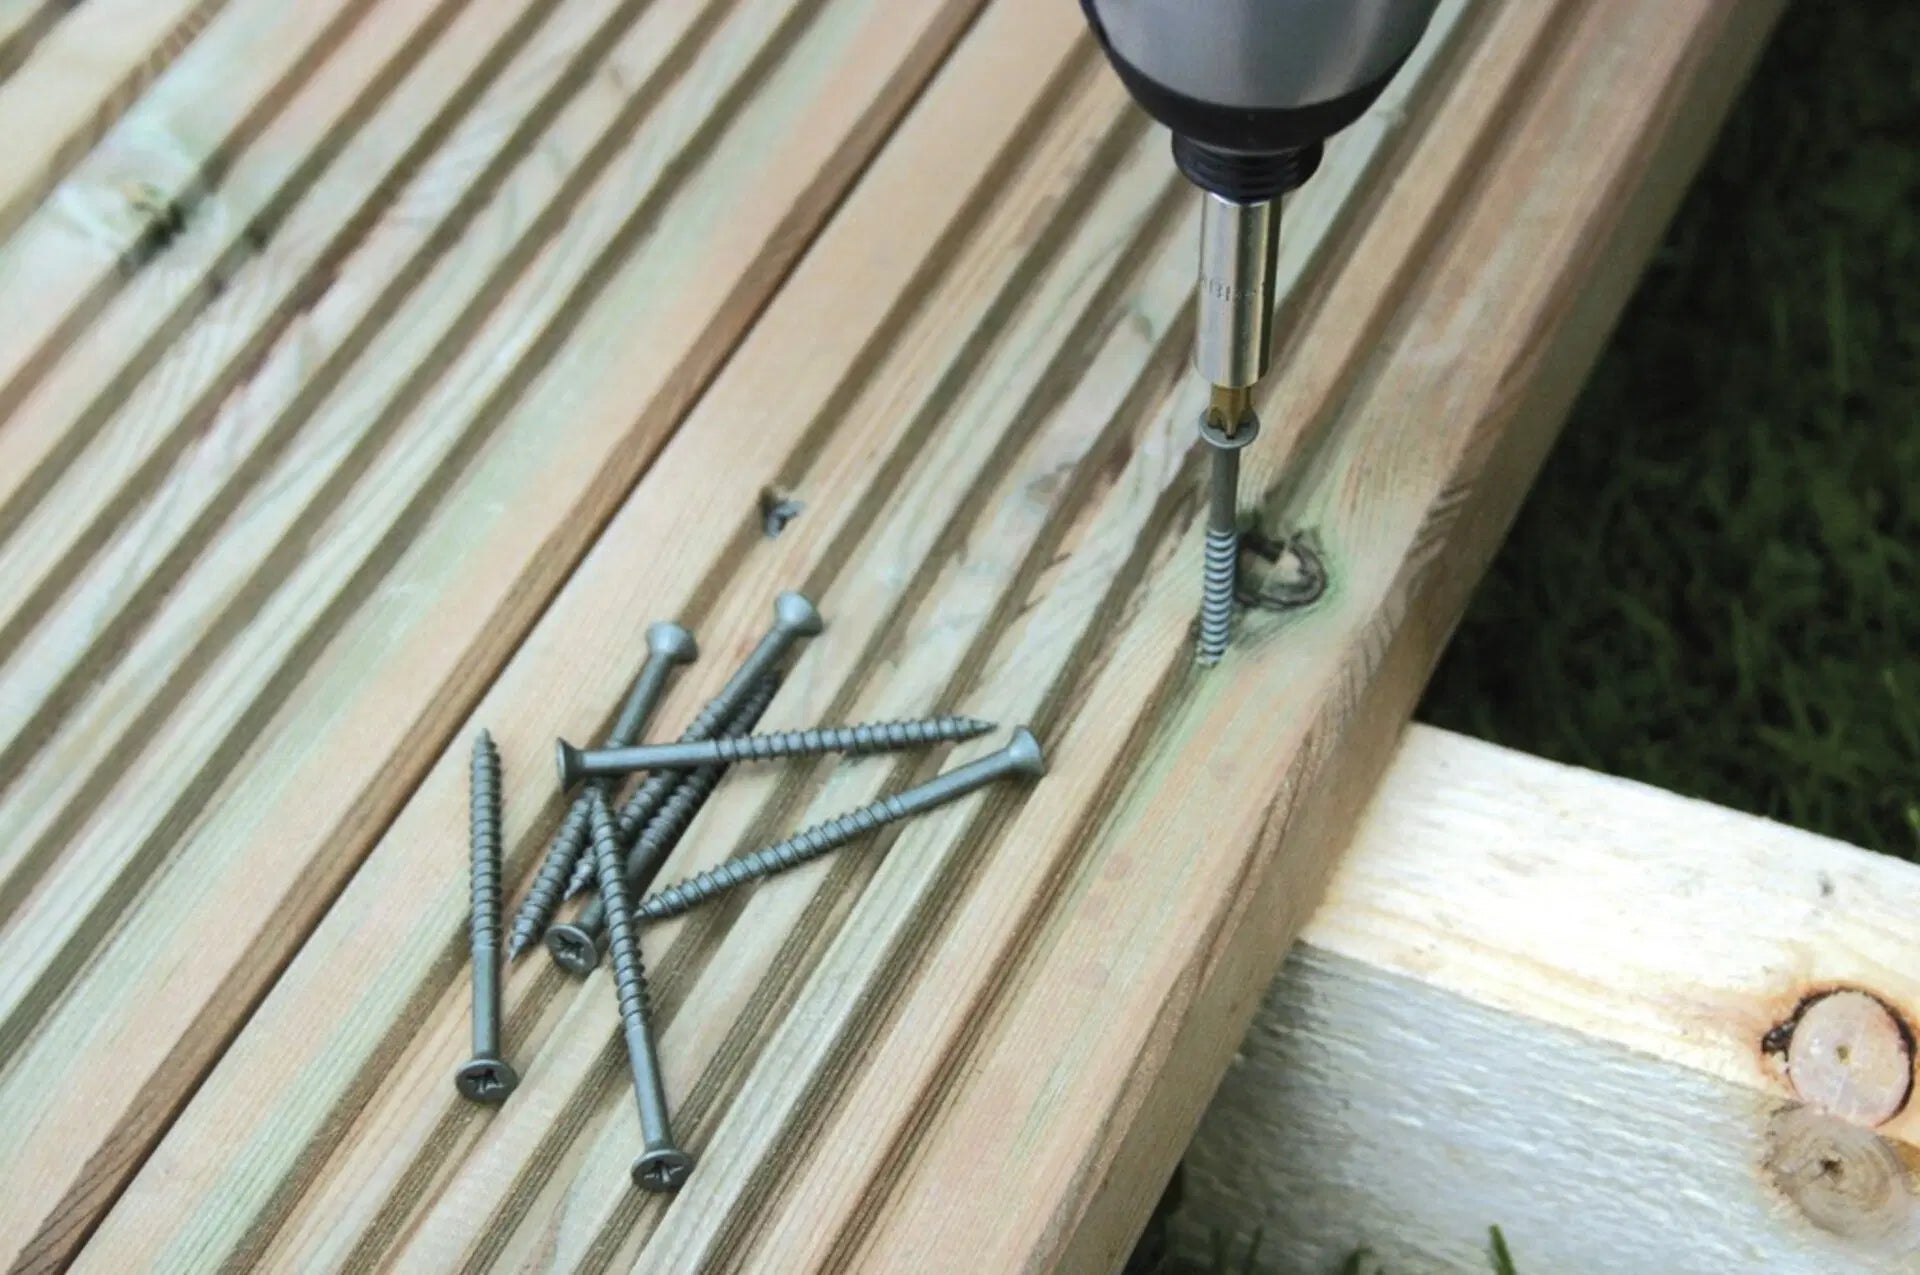 Power 8ft Wooden Decking Kits